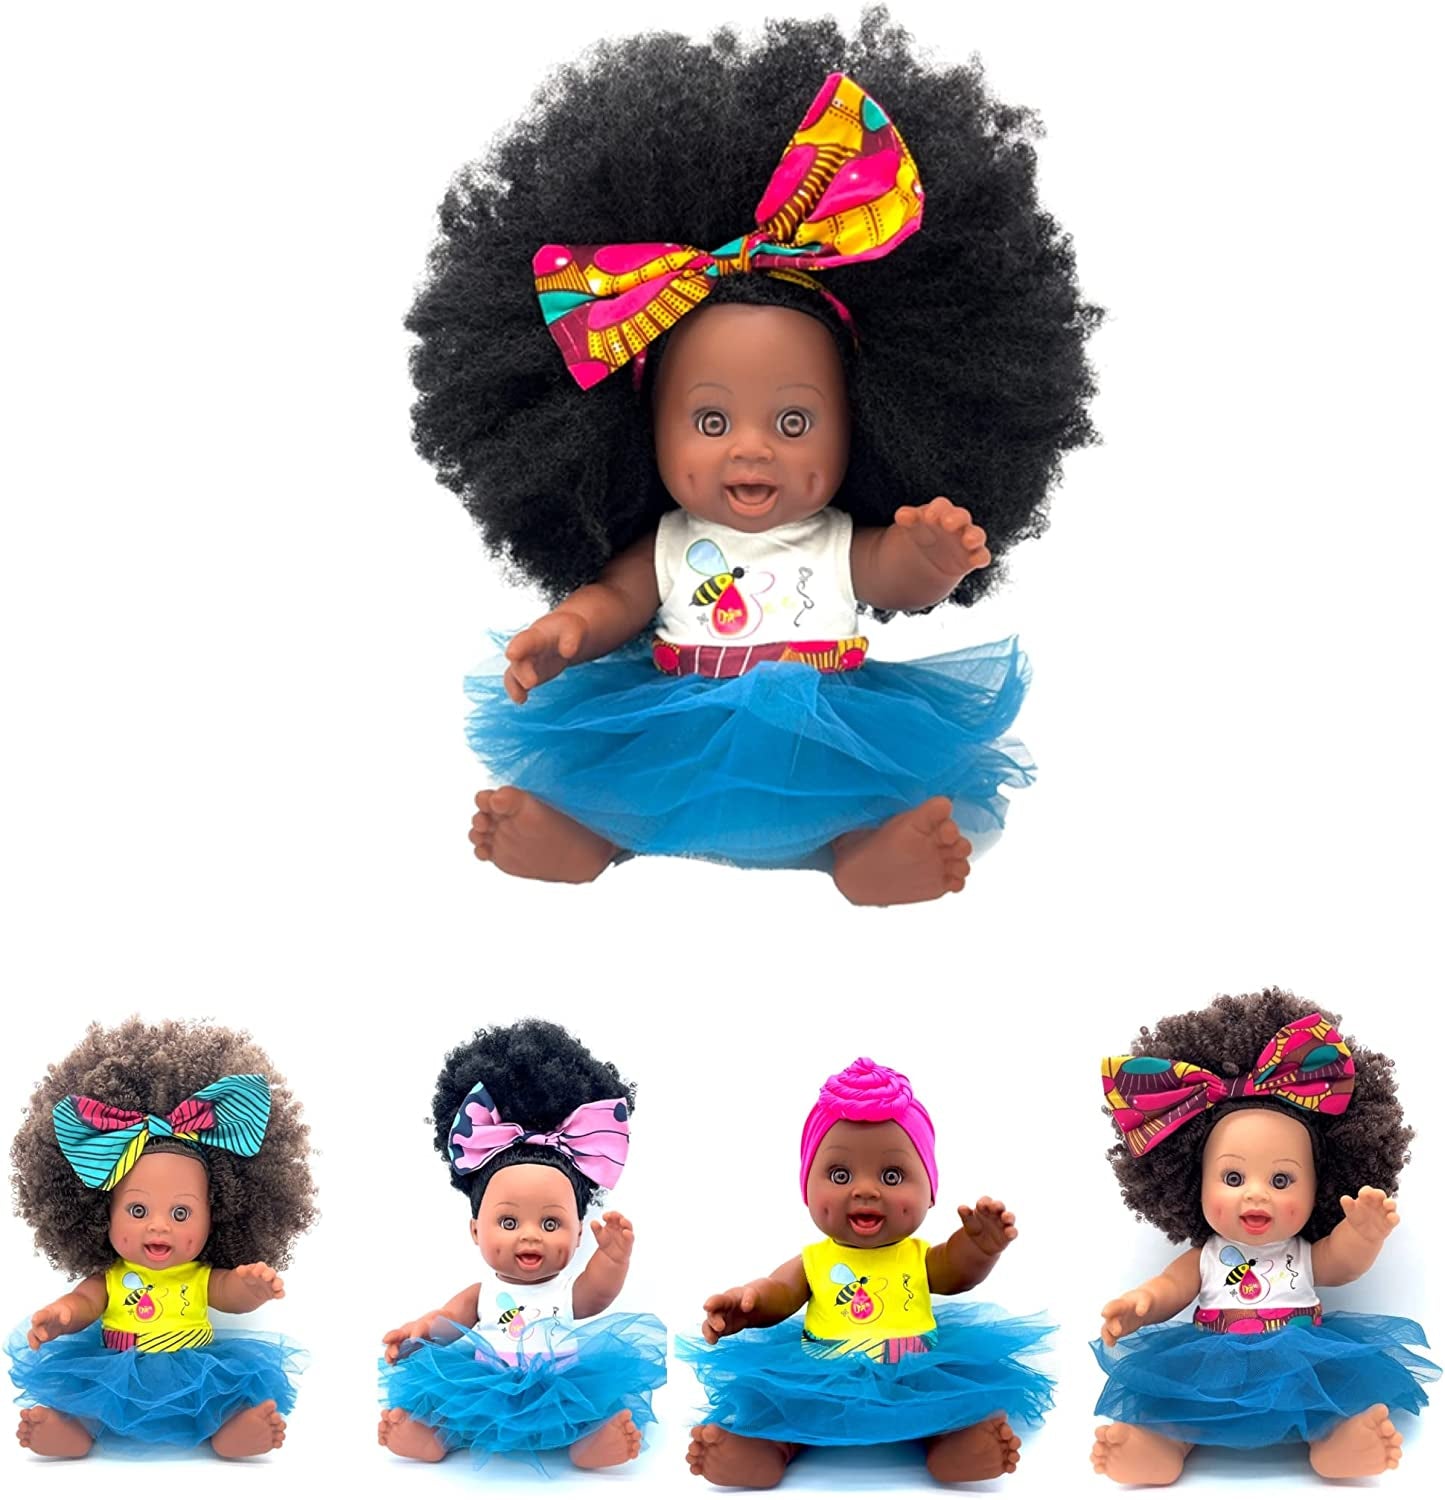 Fro Love Baby Bee Doll - Oprah'S Favorite Things African American Doll, Black Doll, Latino Doll, Afro Doll, Baby Doll, Curly Hair Doll, Baby Doll, African Doll, Birthday Gift